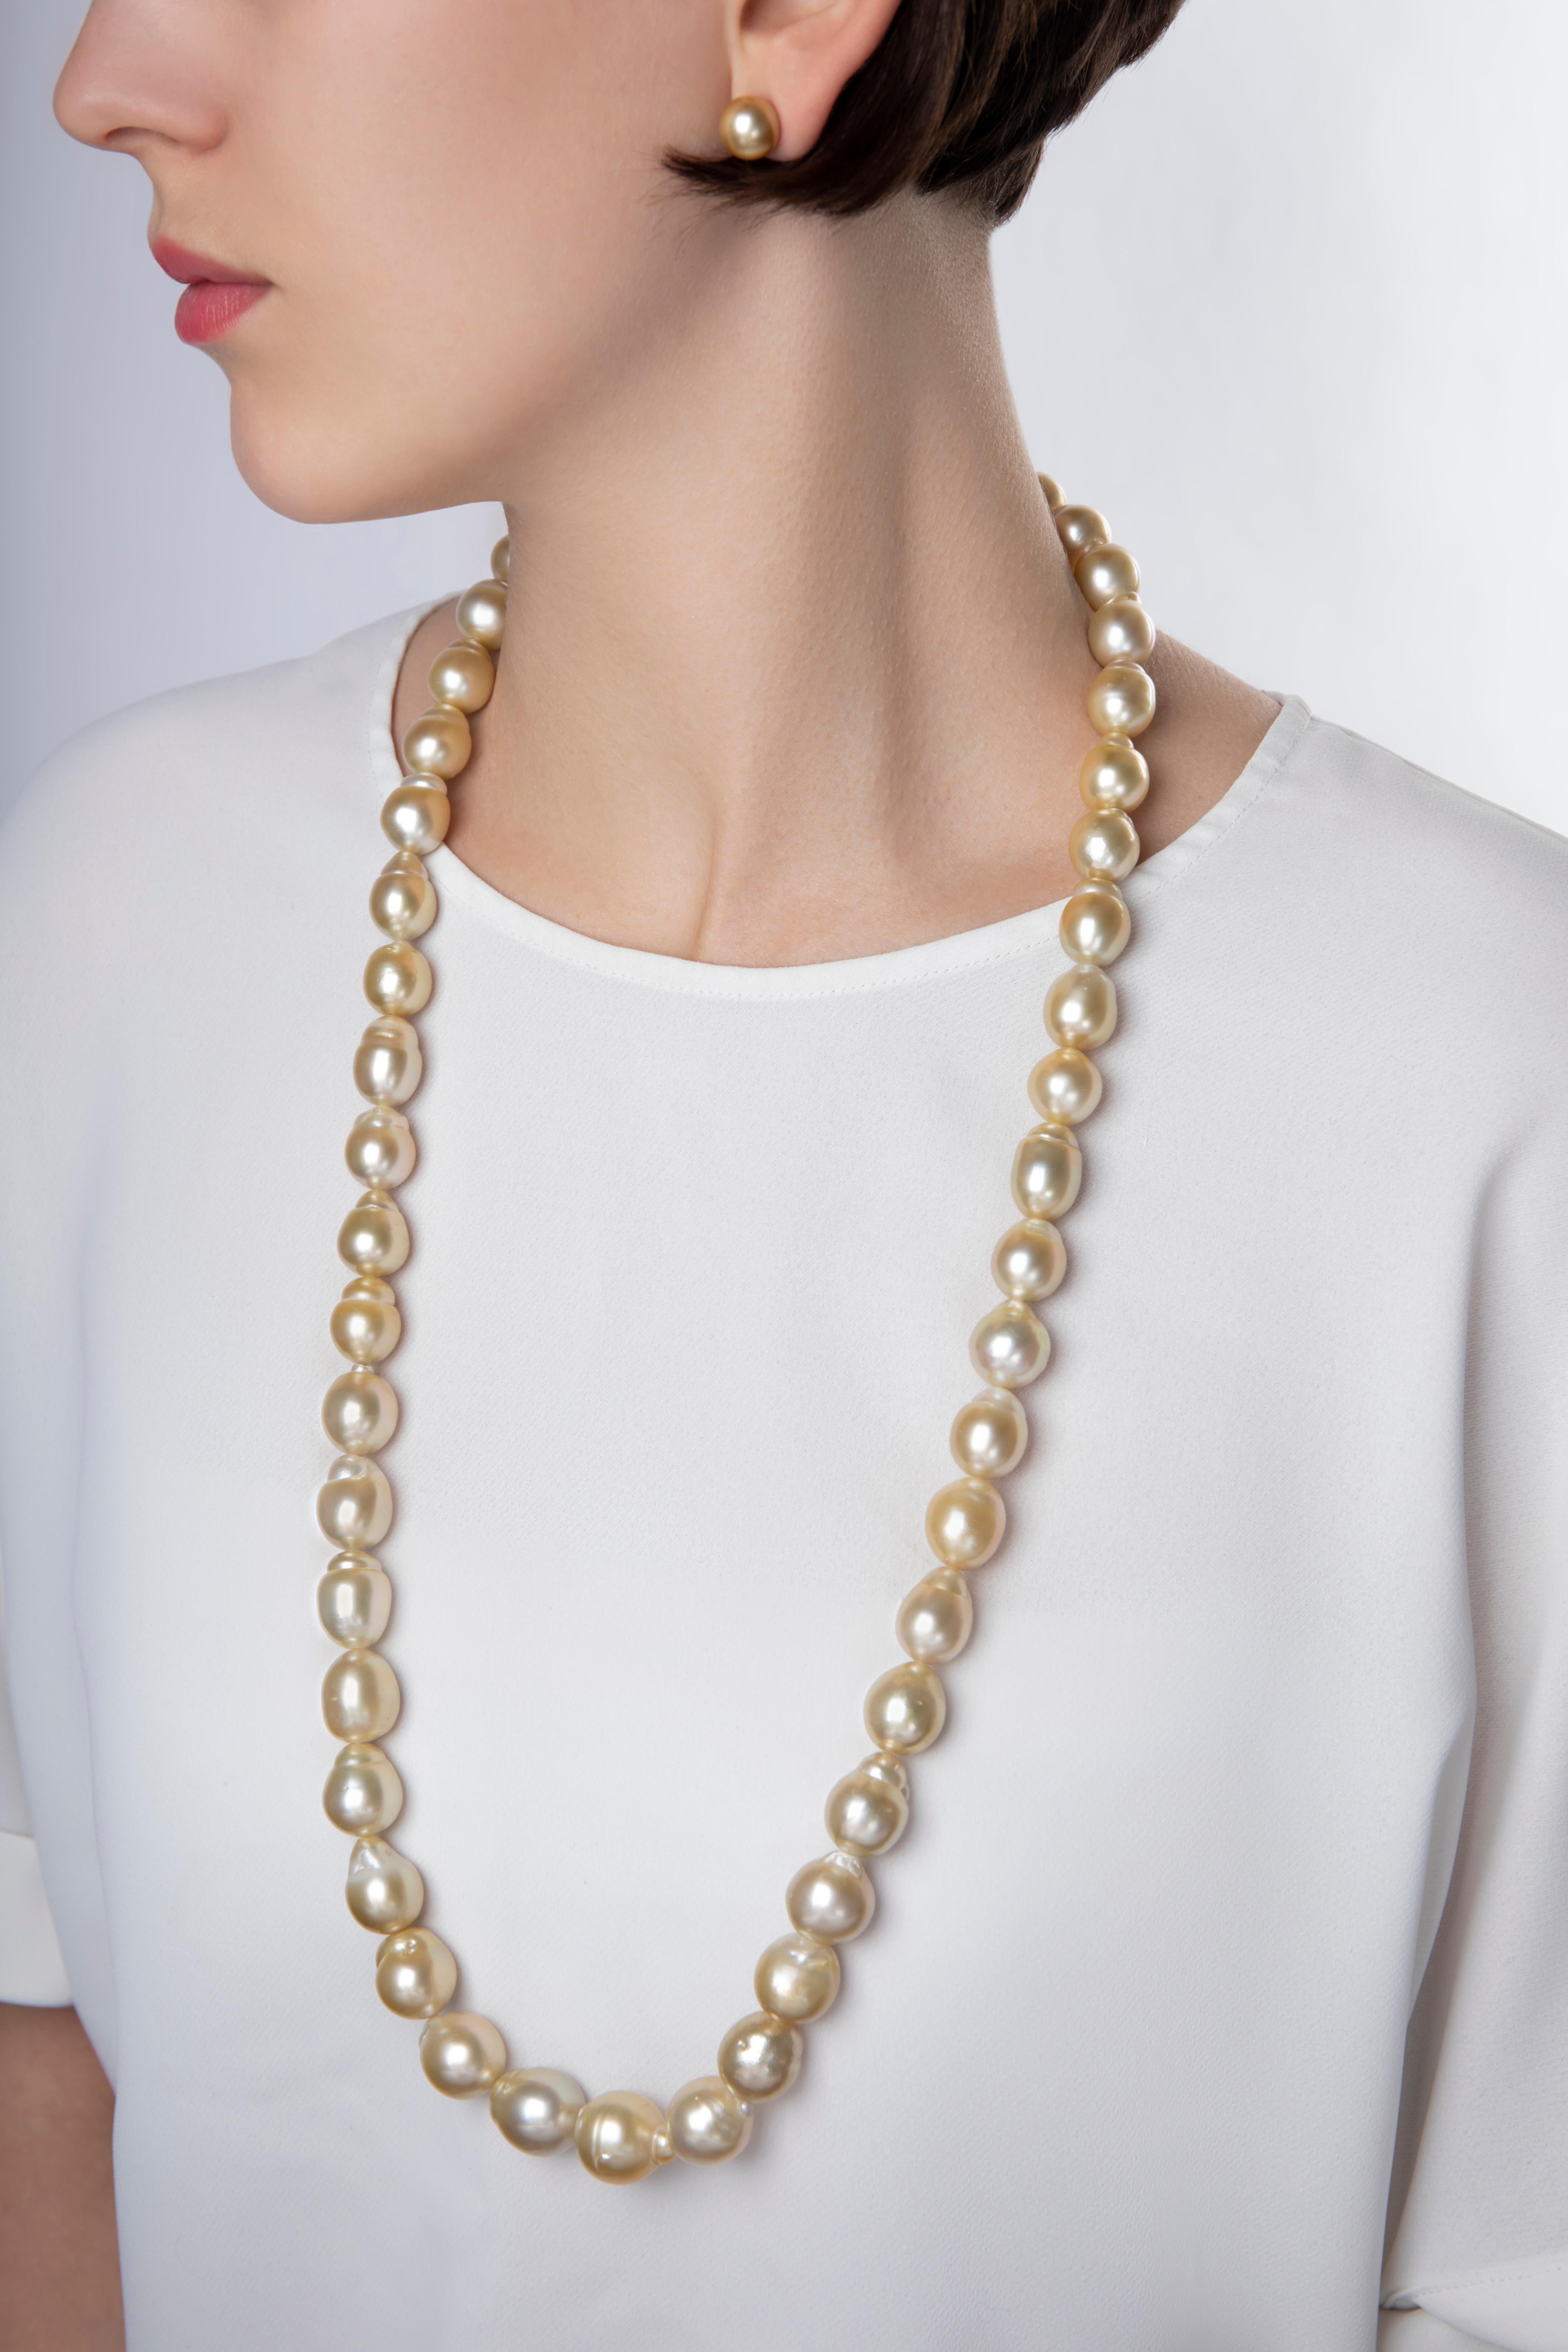 This unique necklace by Yoko London features 31 inches of spectacular 13-17mm baroque Golden South Sea pearls. Each baroque pearl is completely unique and this one of a kind necklace perfectly highlights their allure and mystique. A true statement